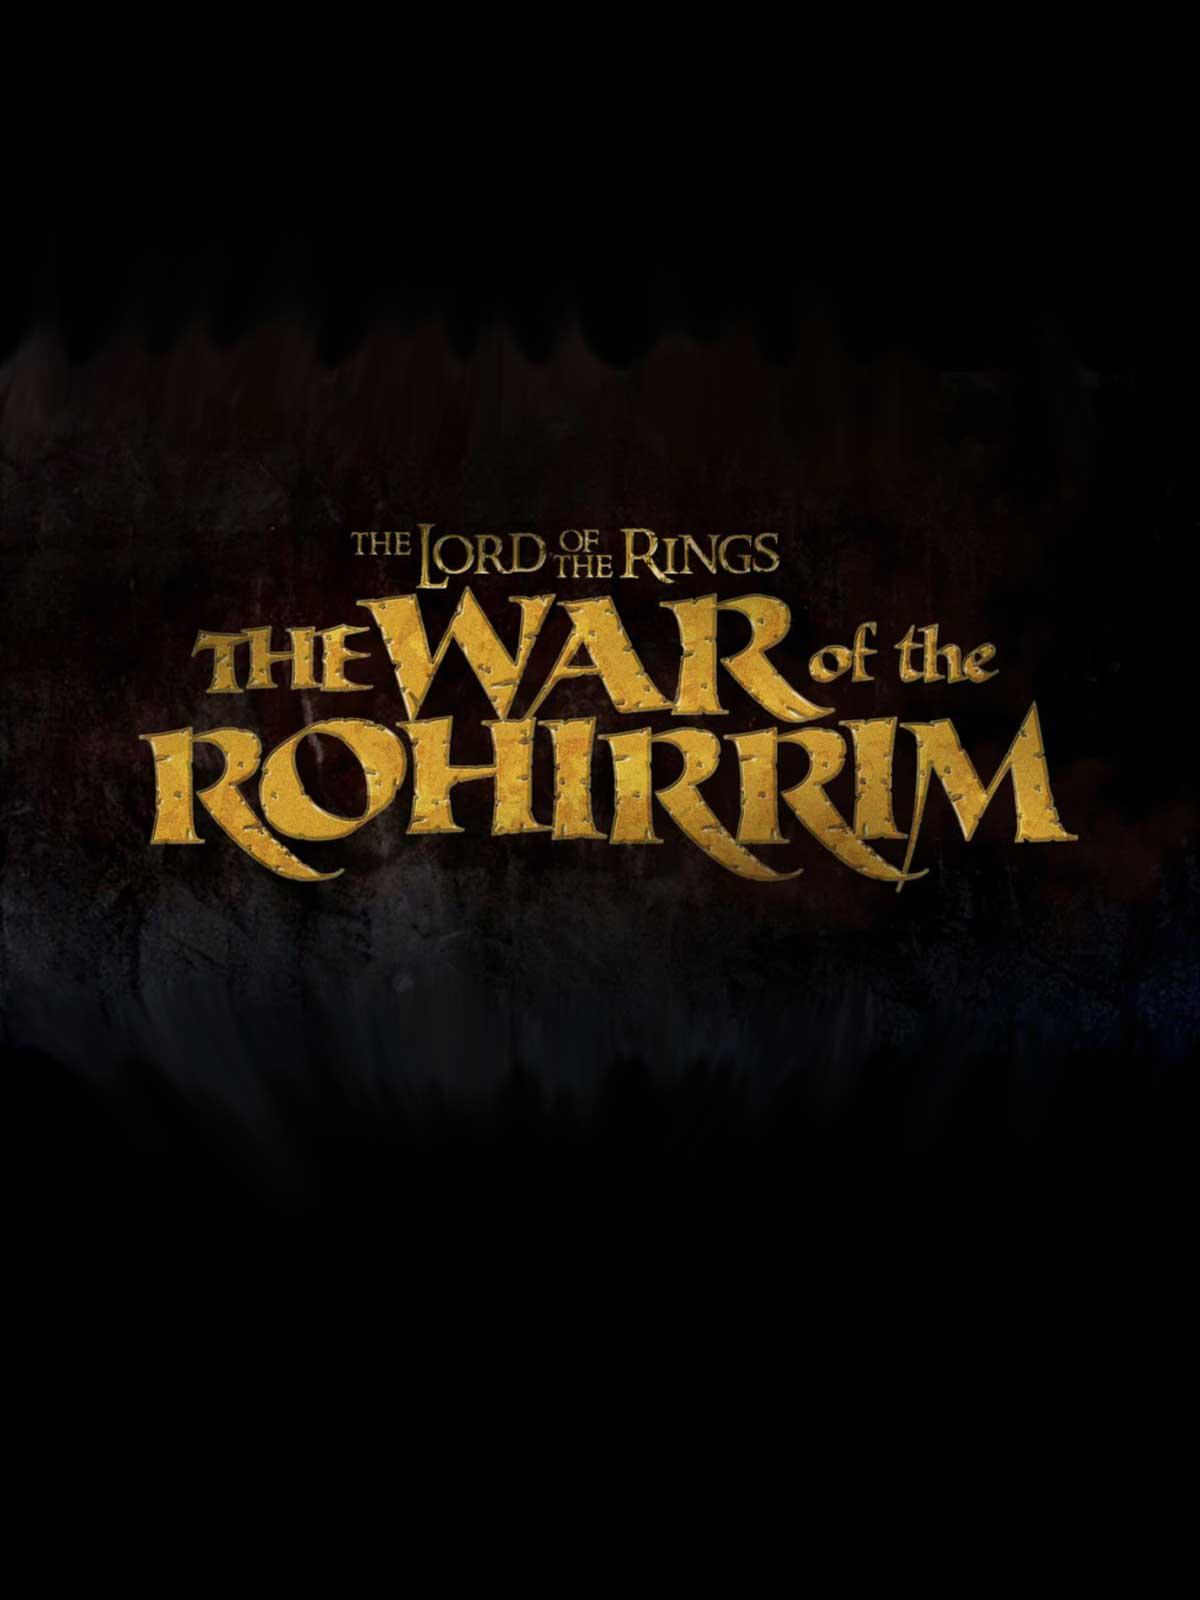 THE LORD OF THE RINGS: THE WAR OF THE ROHIRRIM